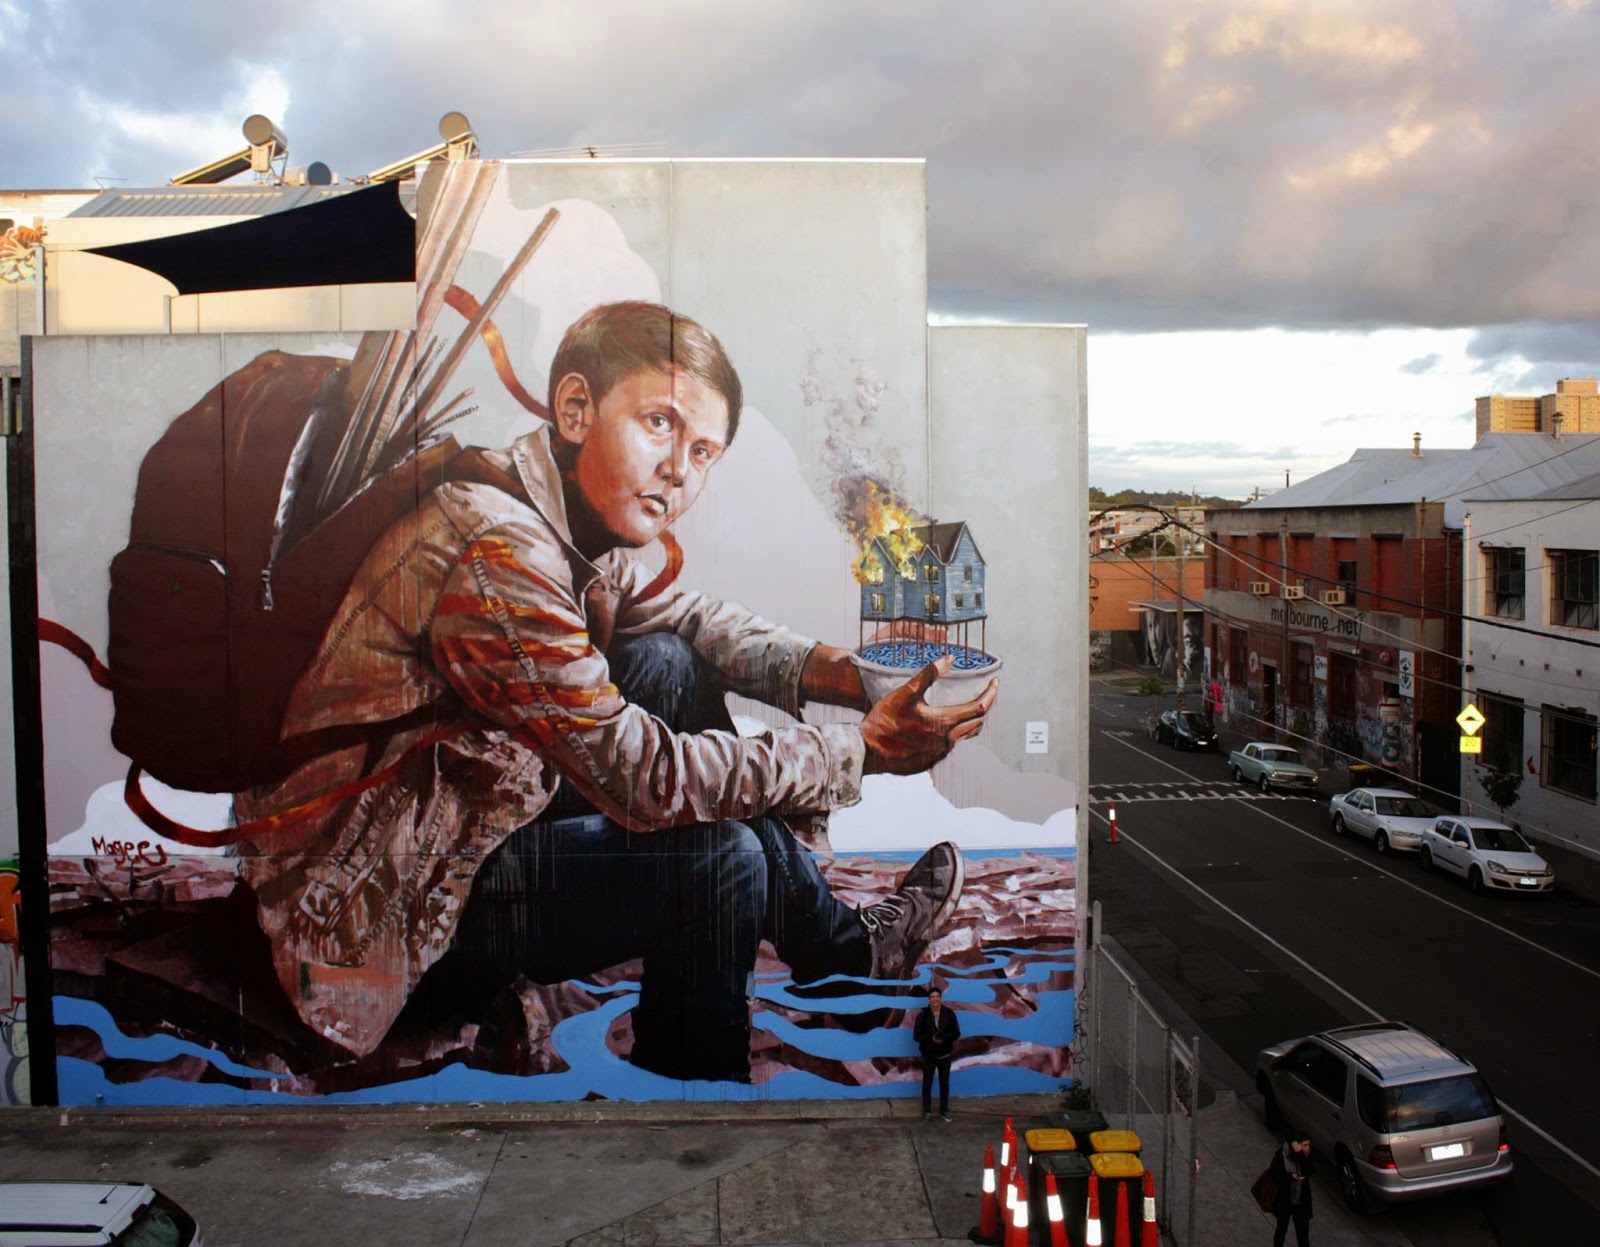 Fintan Magee is currently in Australia where he just wrapped up yet another gigantic mural somewhere in Collingwood, Melbourne.